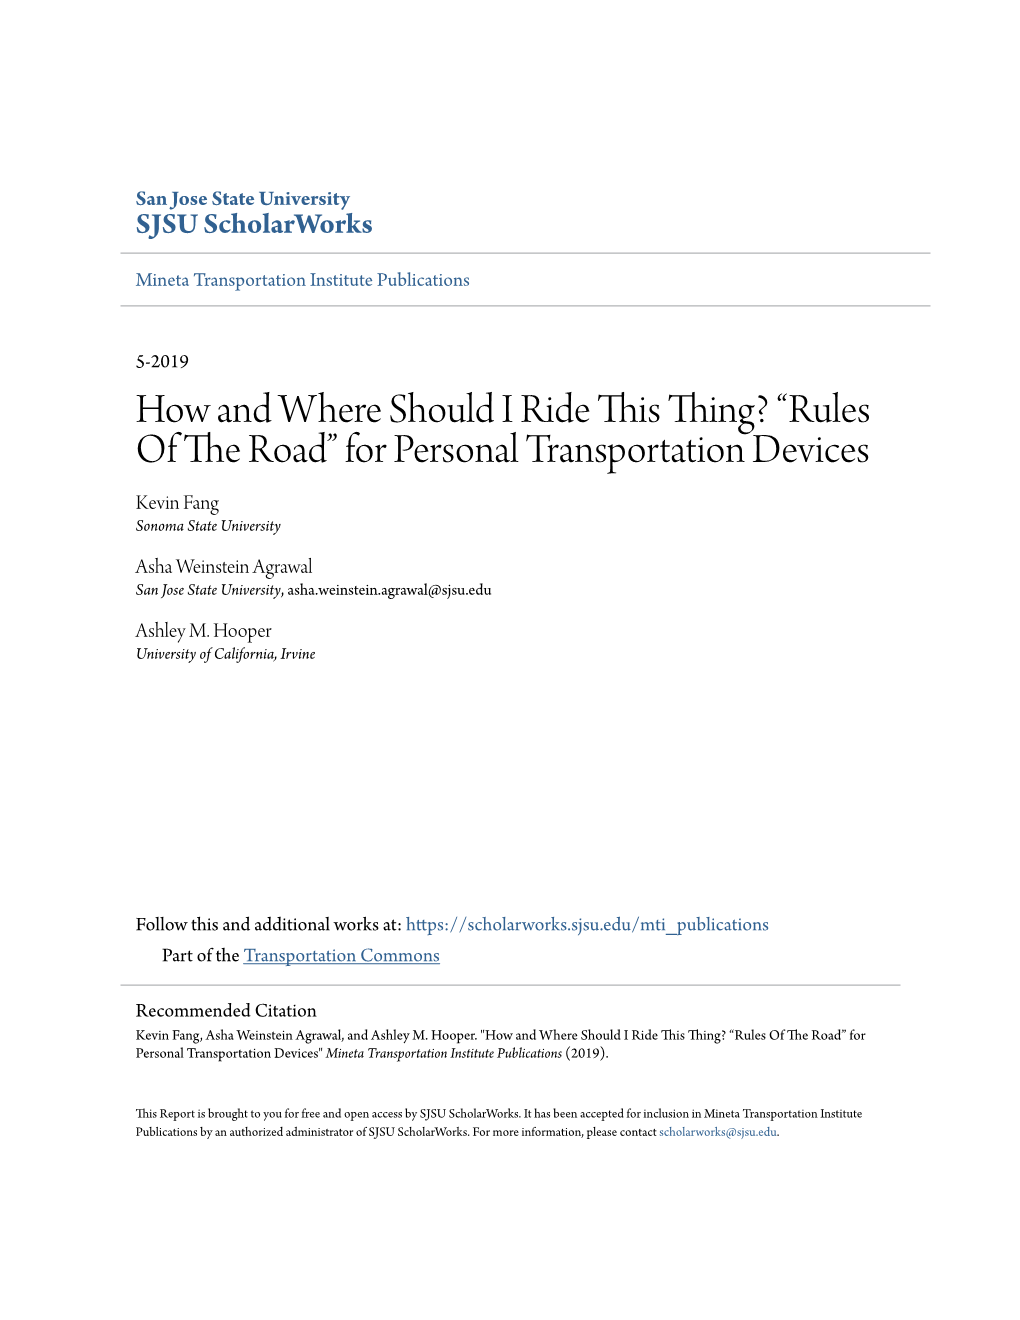 “Rules of the Road” for Personal Transportation Devices Kevin Fang Sonoma State University